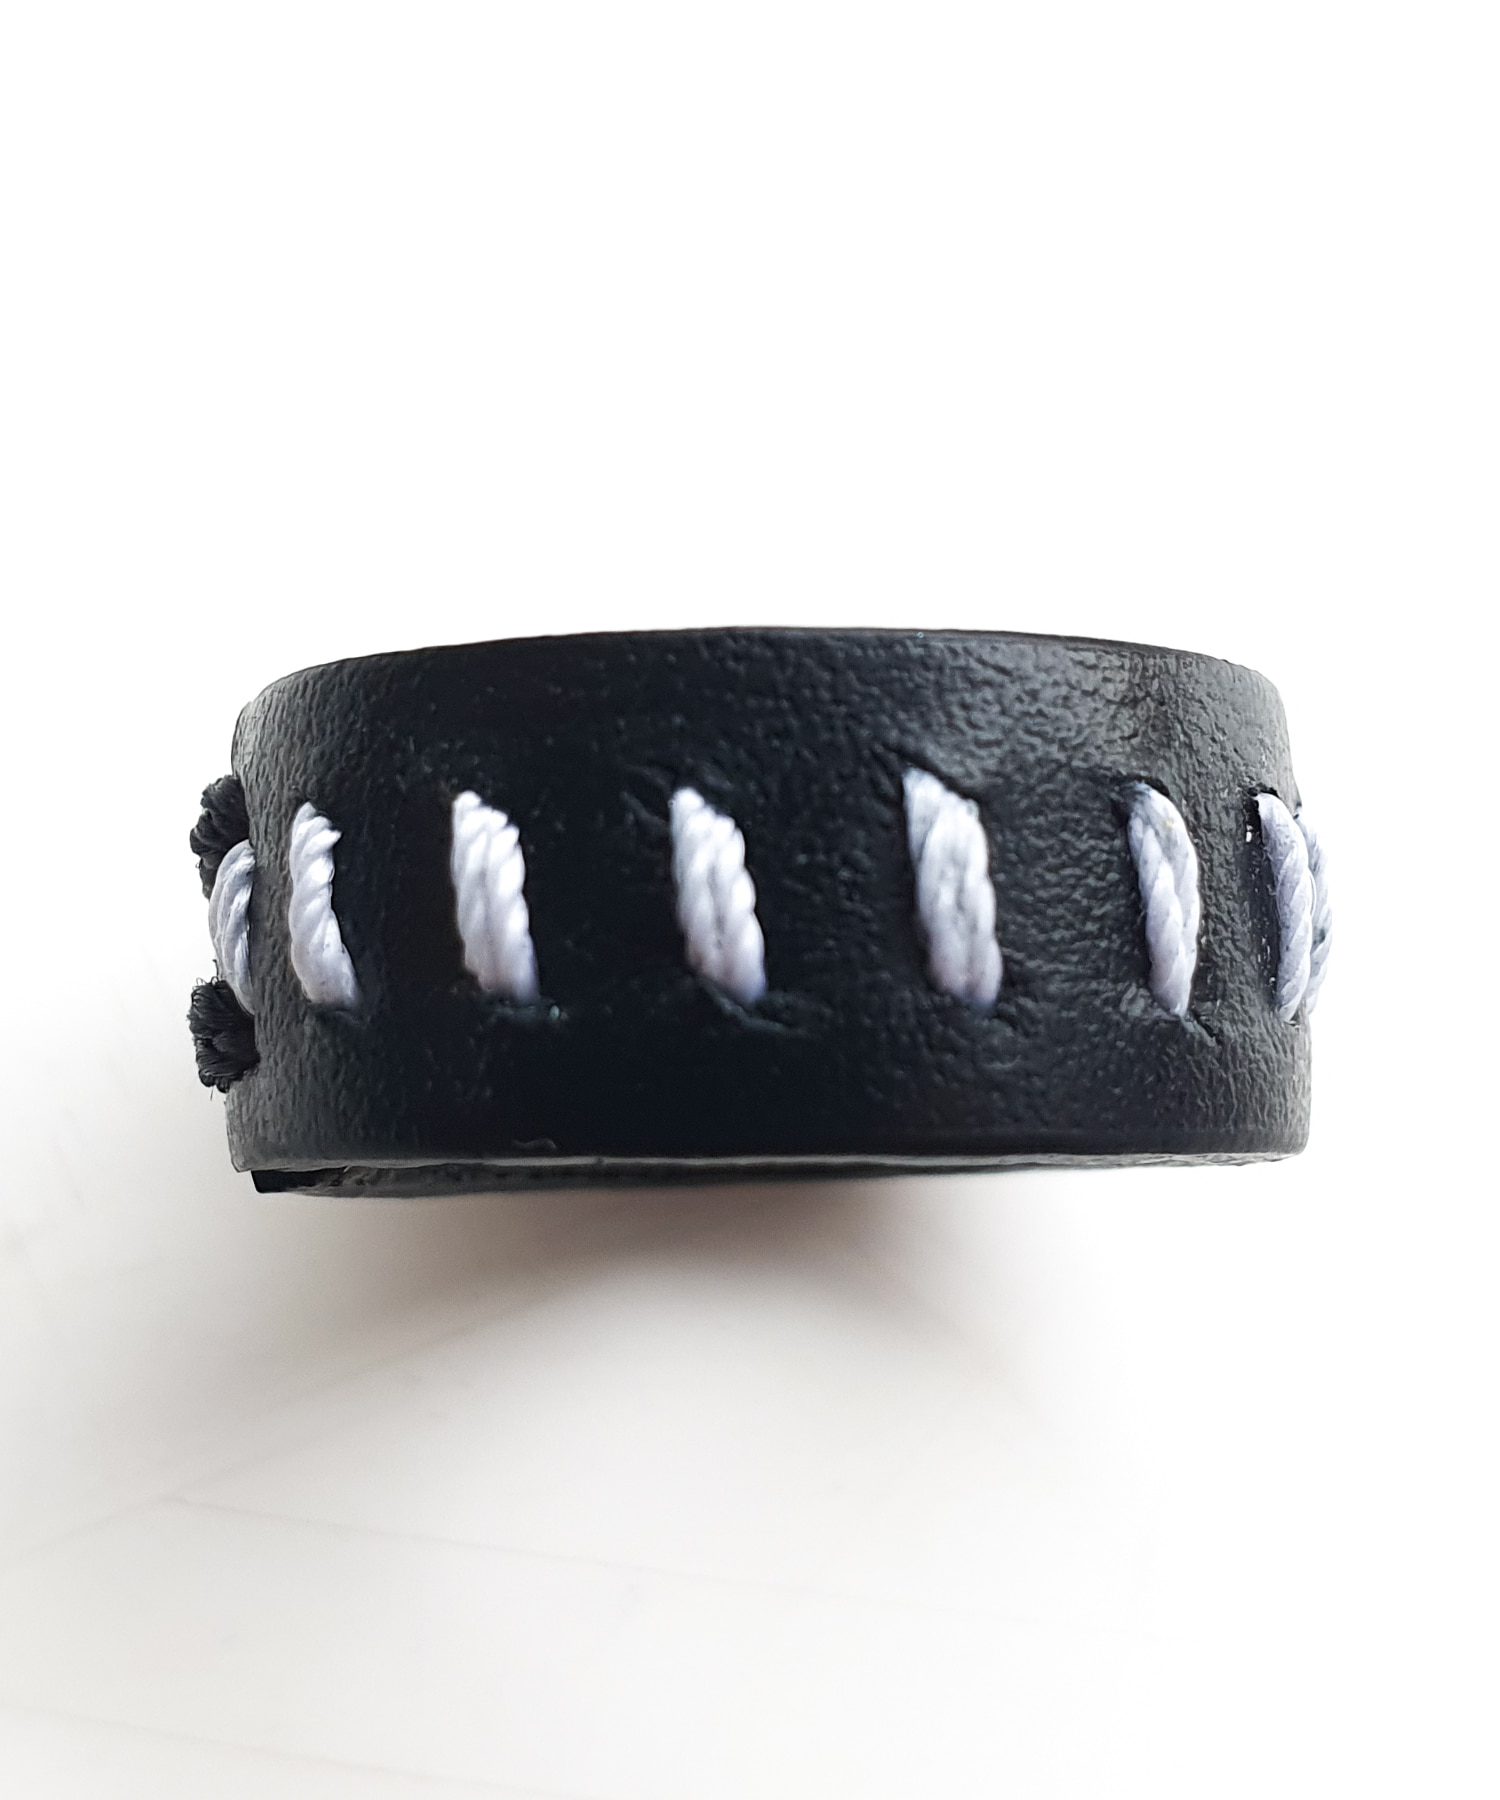 WIDE STITCH LEATHER RING - HANDMADE